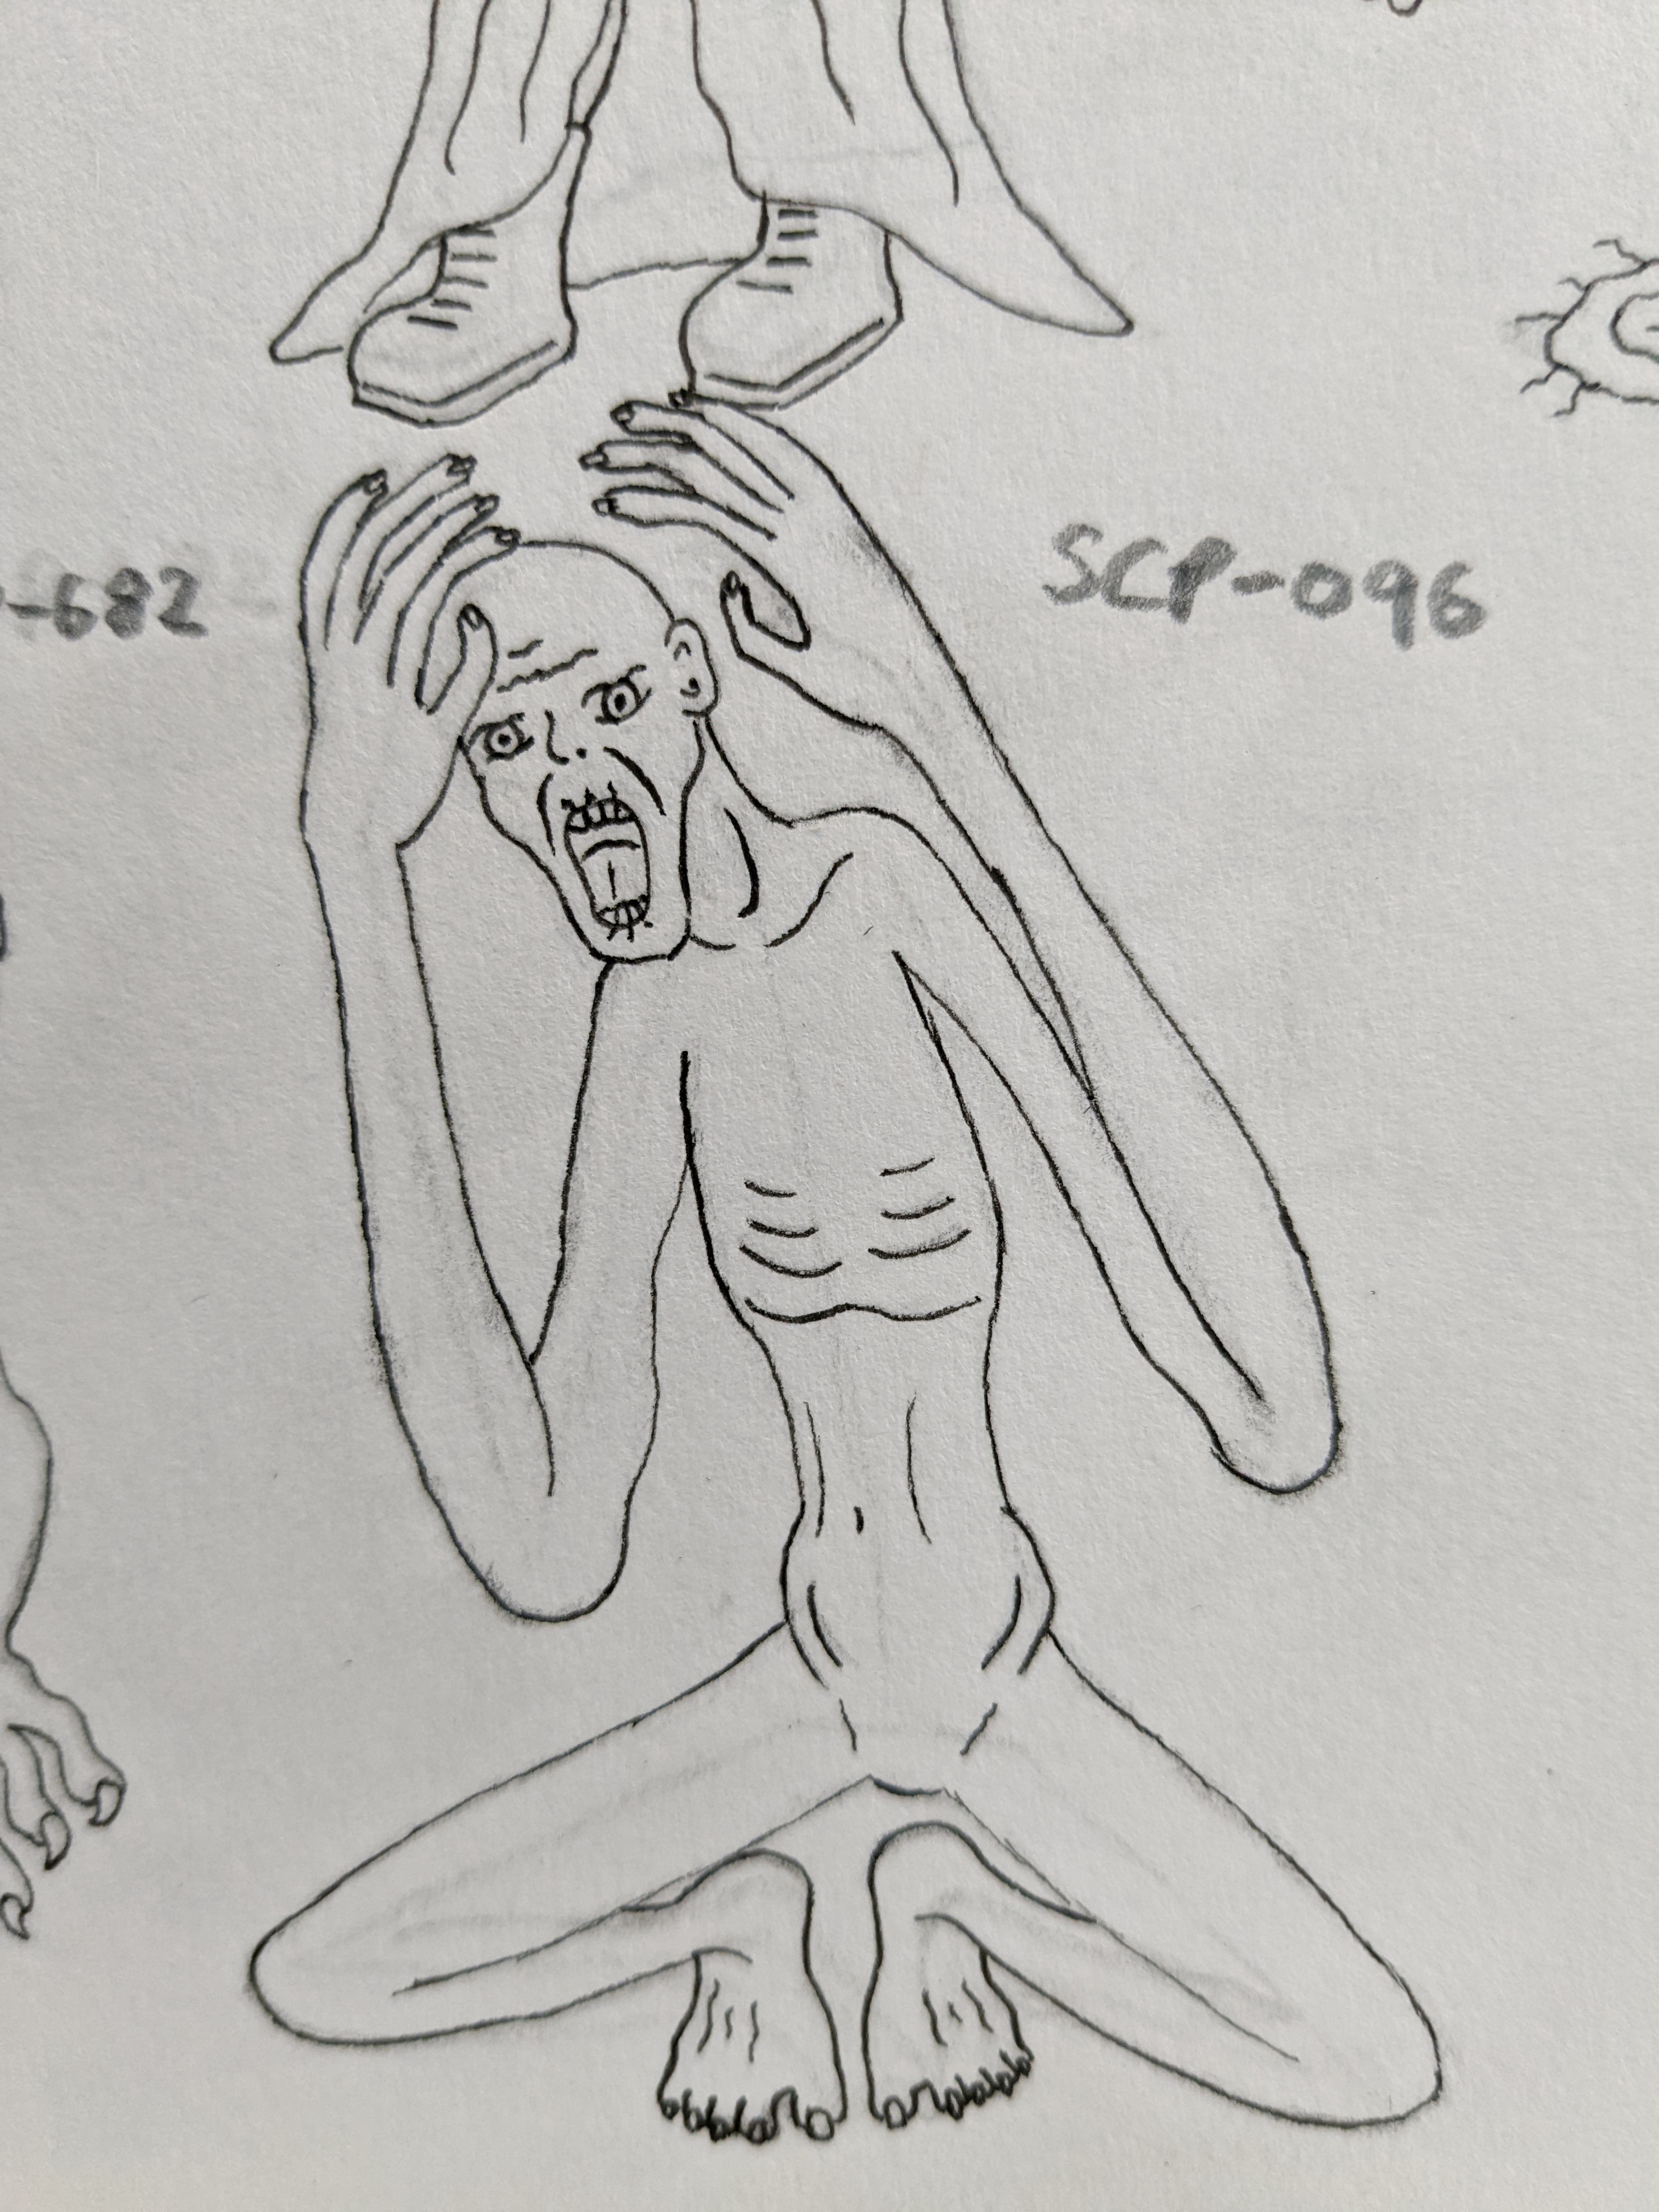 With Many Voices (SCP-939) by DON2602 on DeviantArt